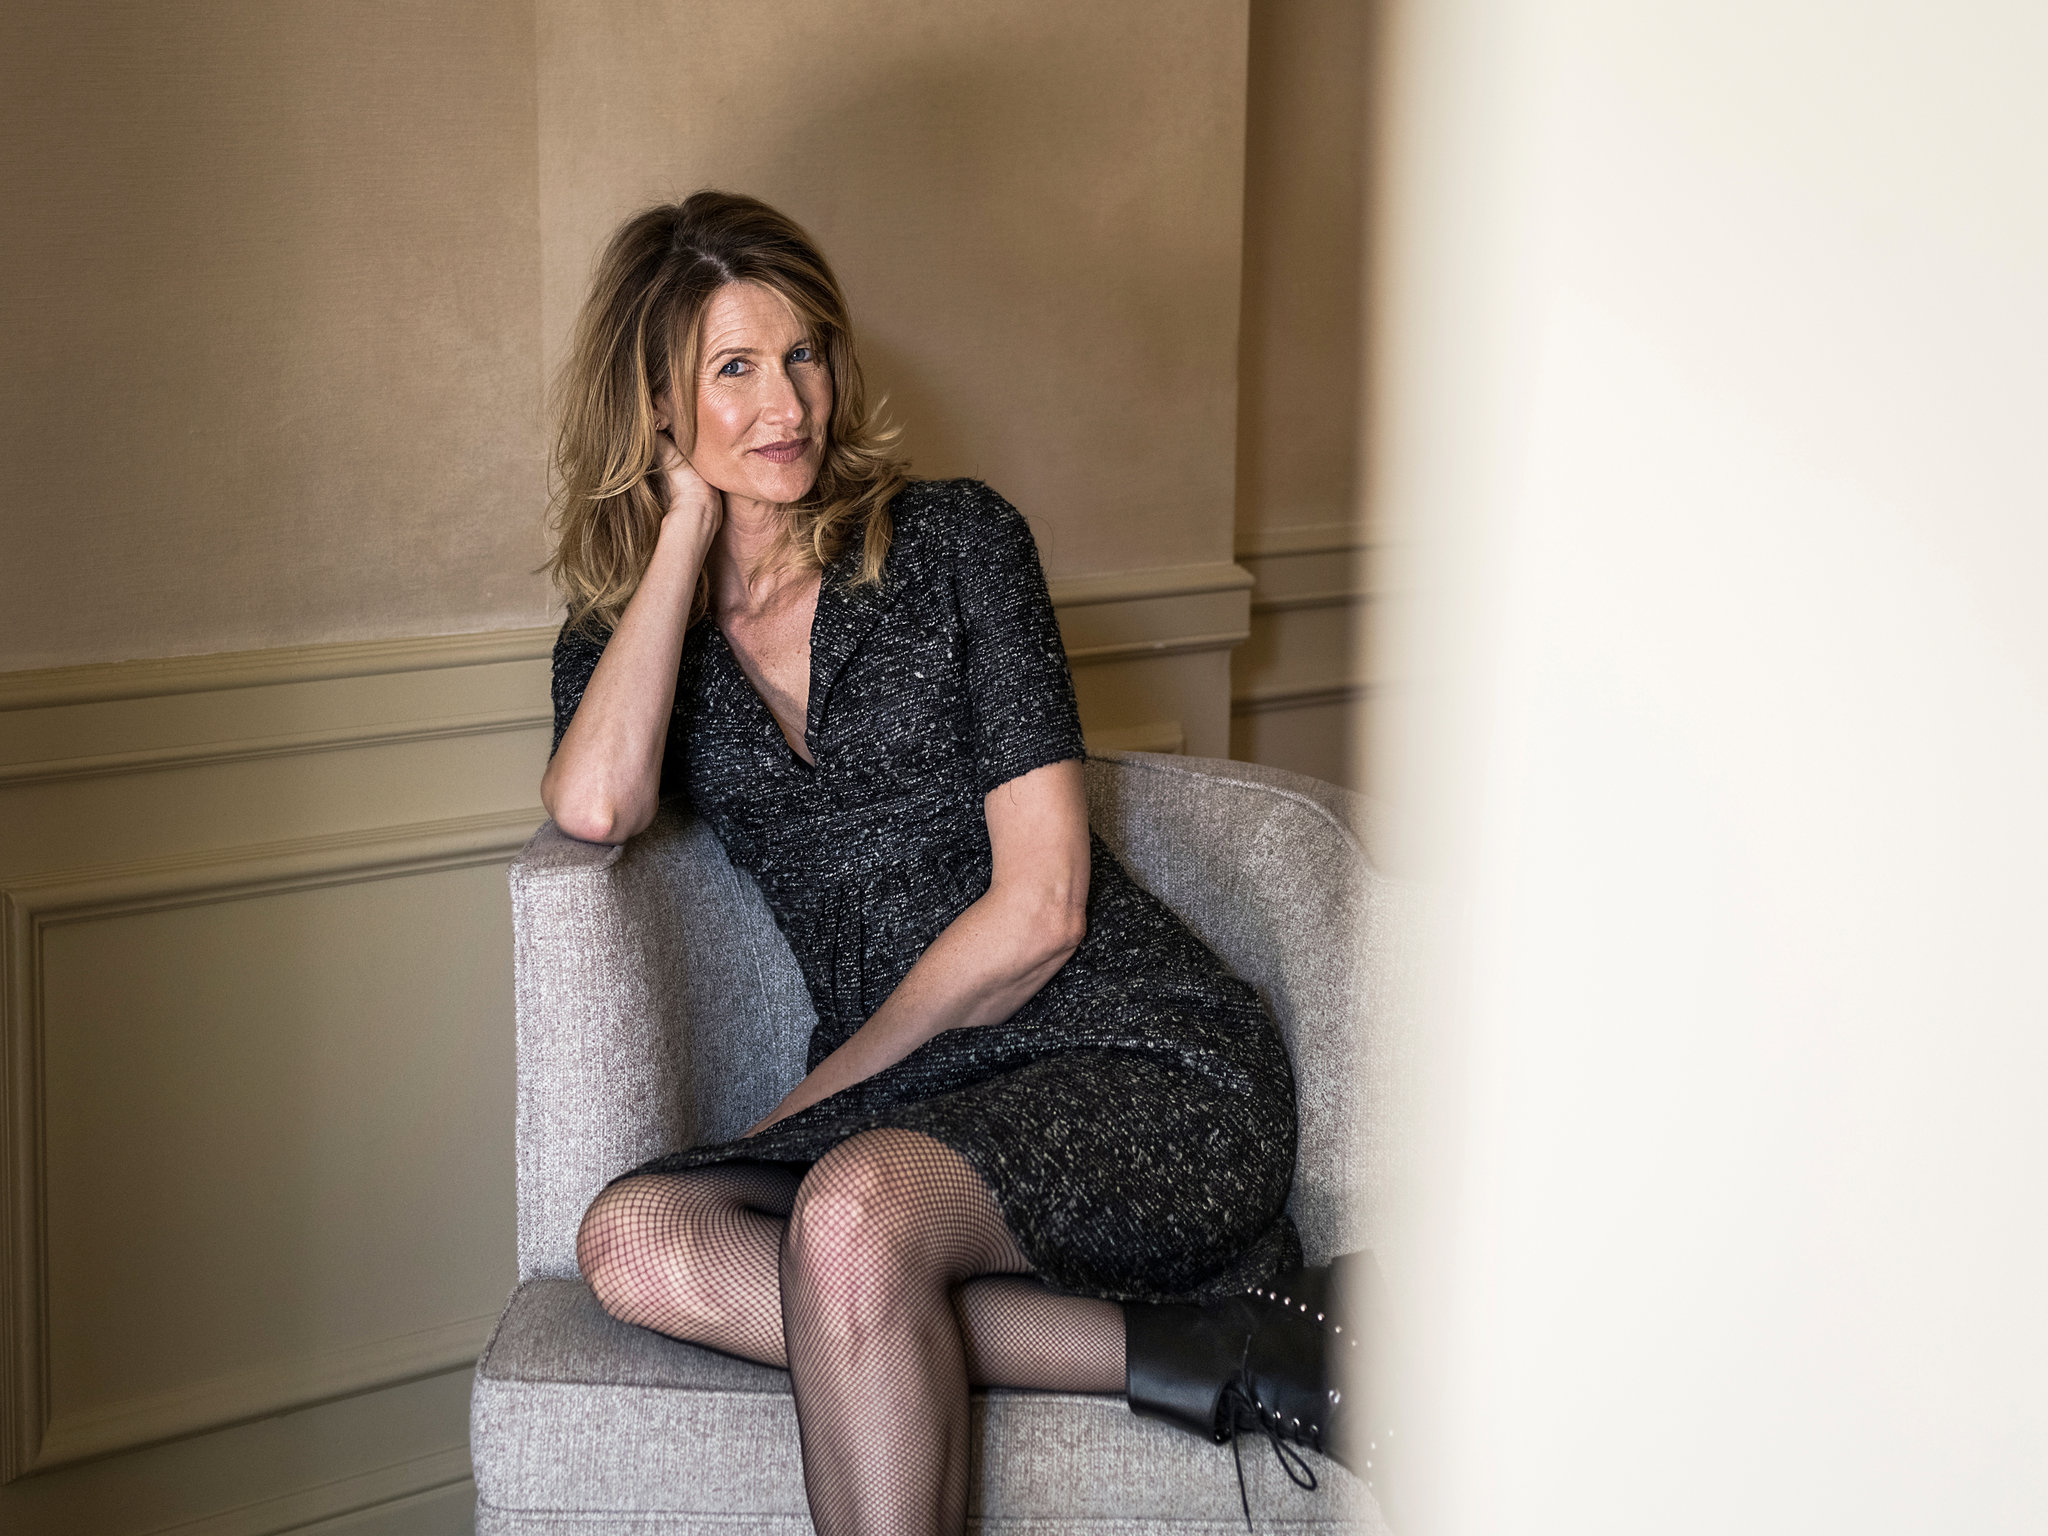 Find Out Actress Laura Dern's Secret to Youth.